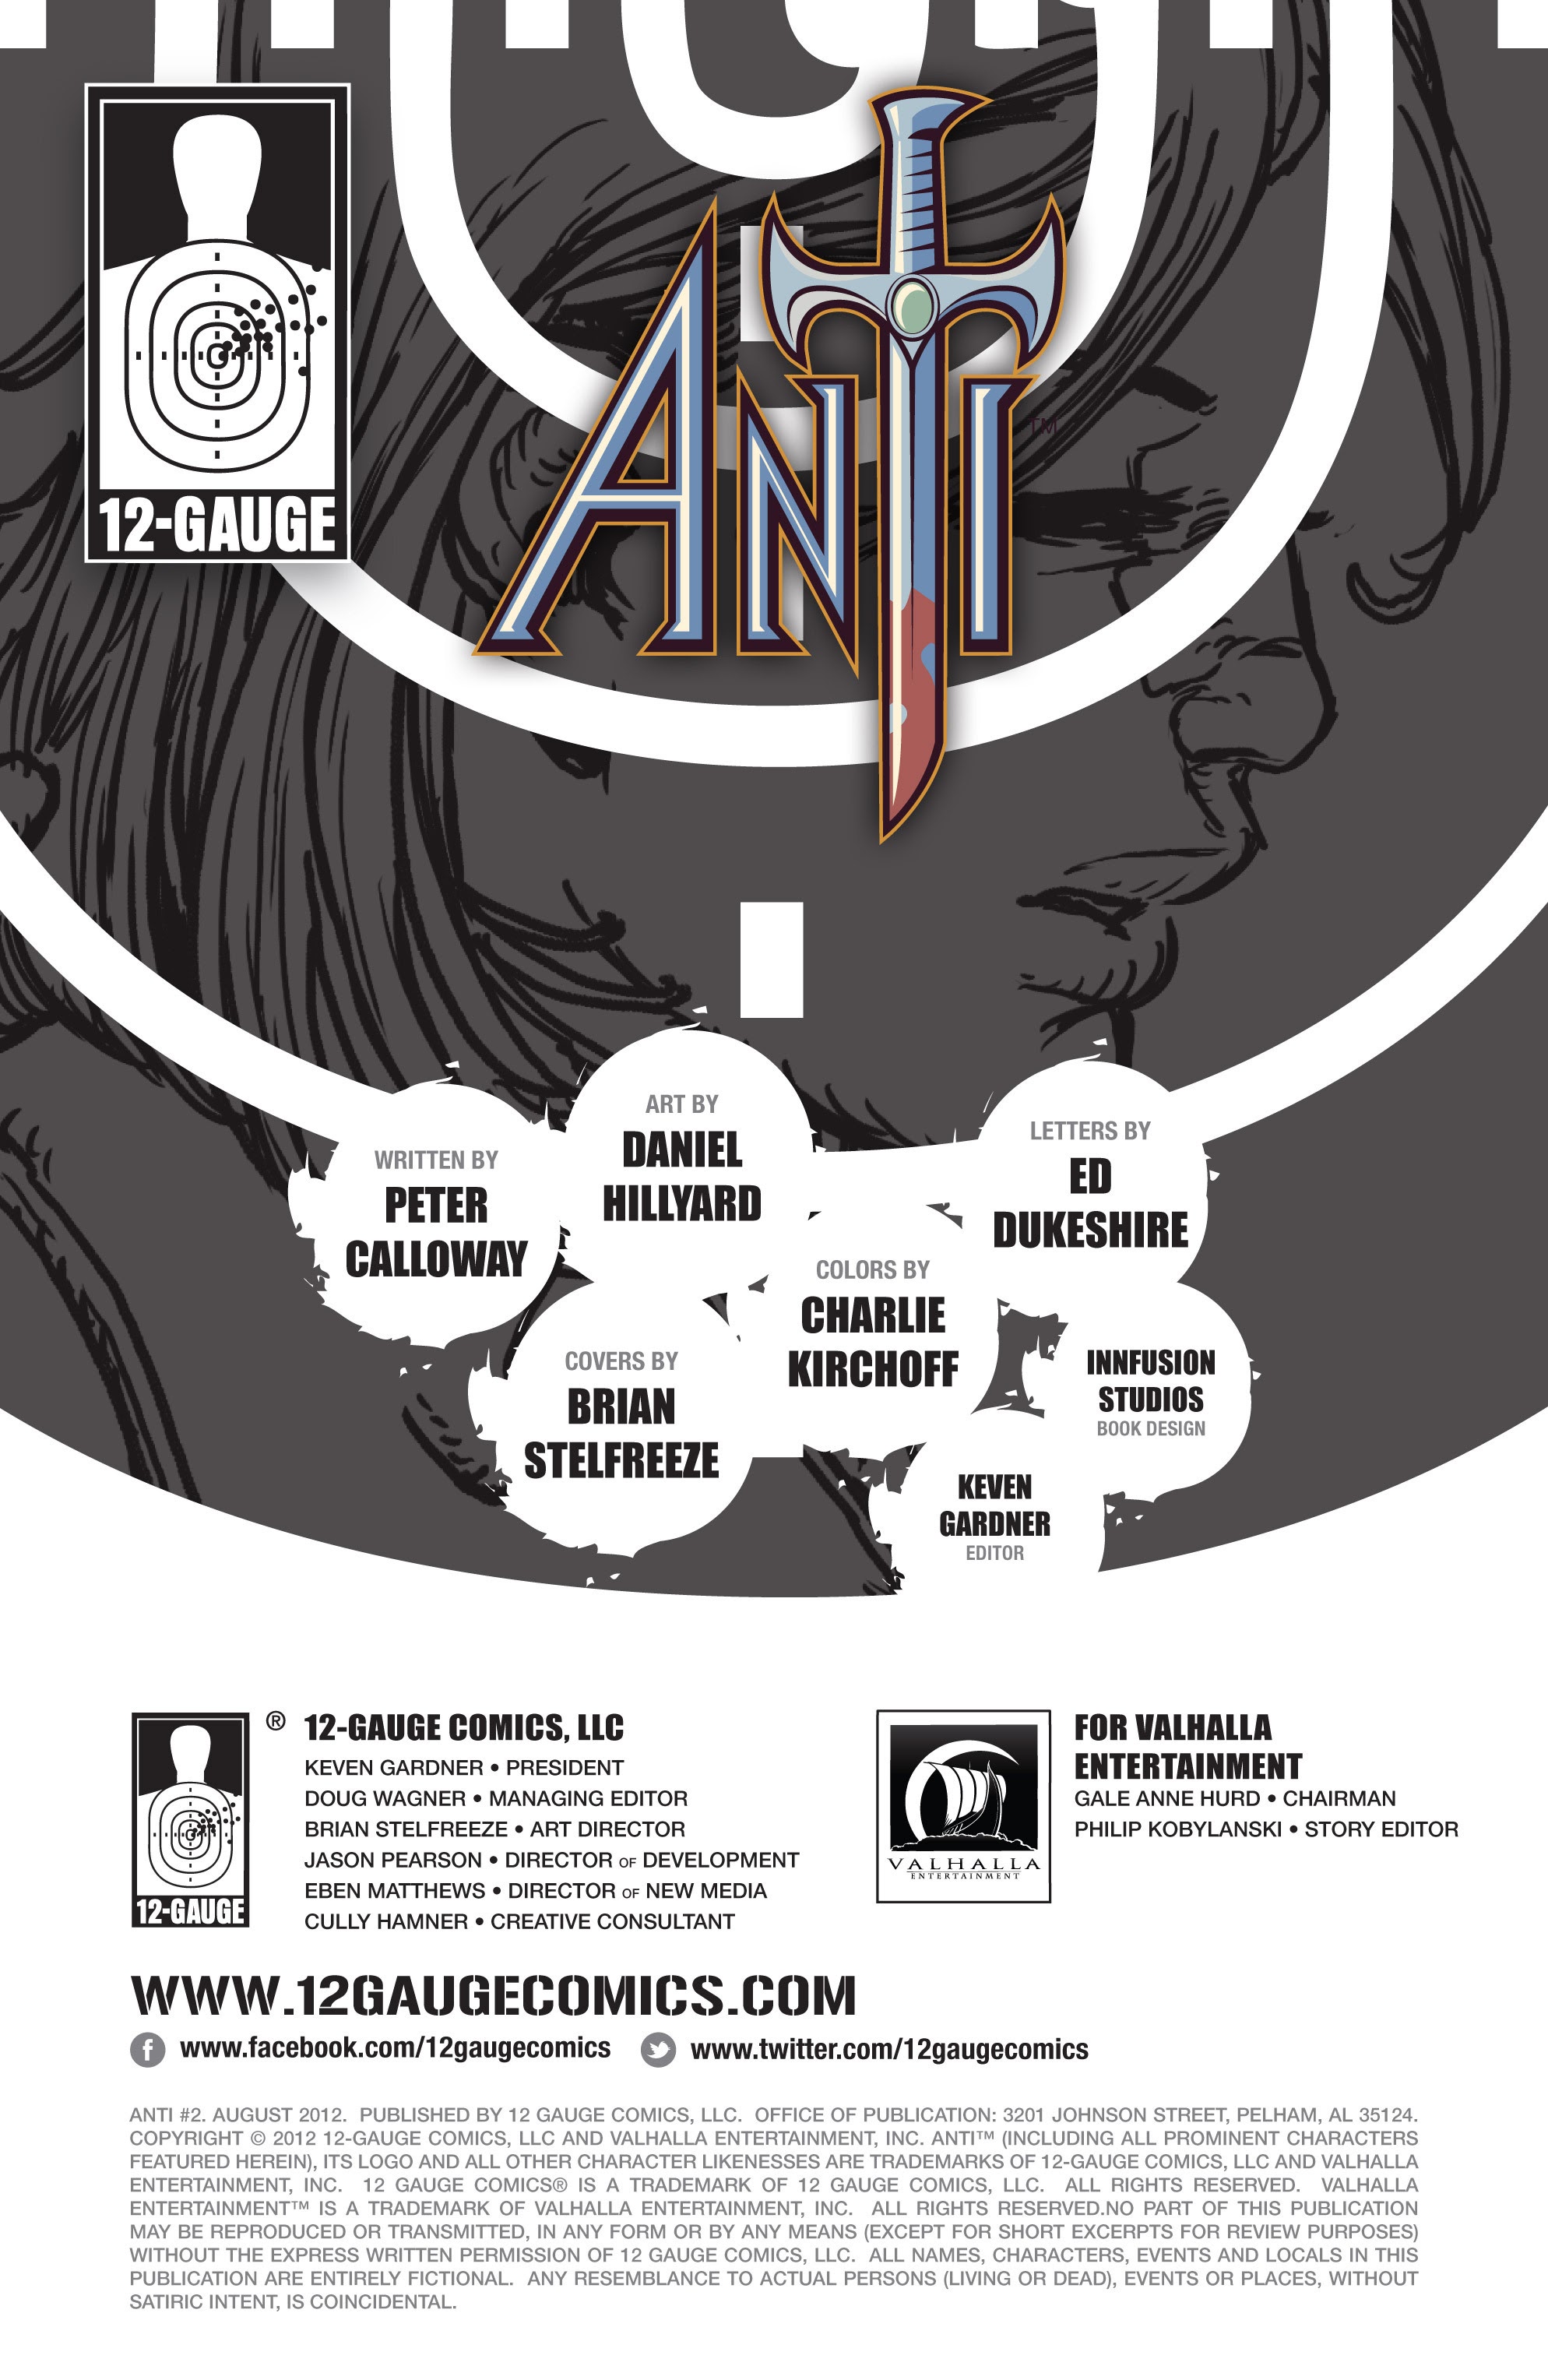 Read online Anti comic -  Issue #2 - 2